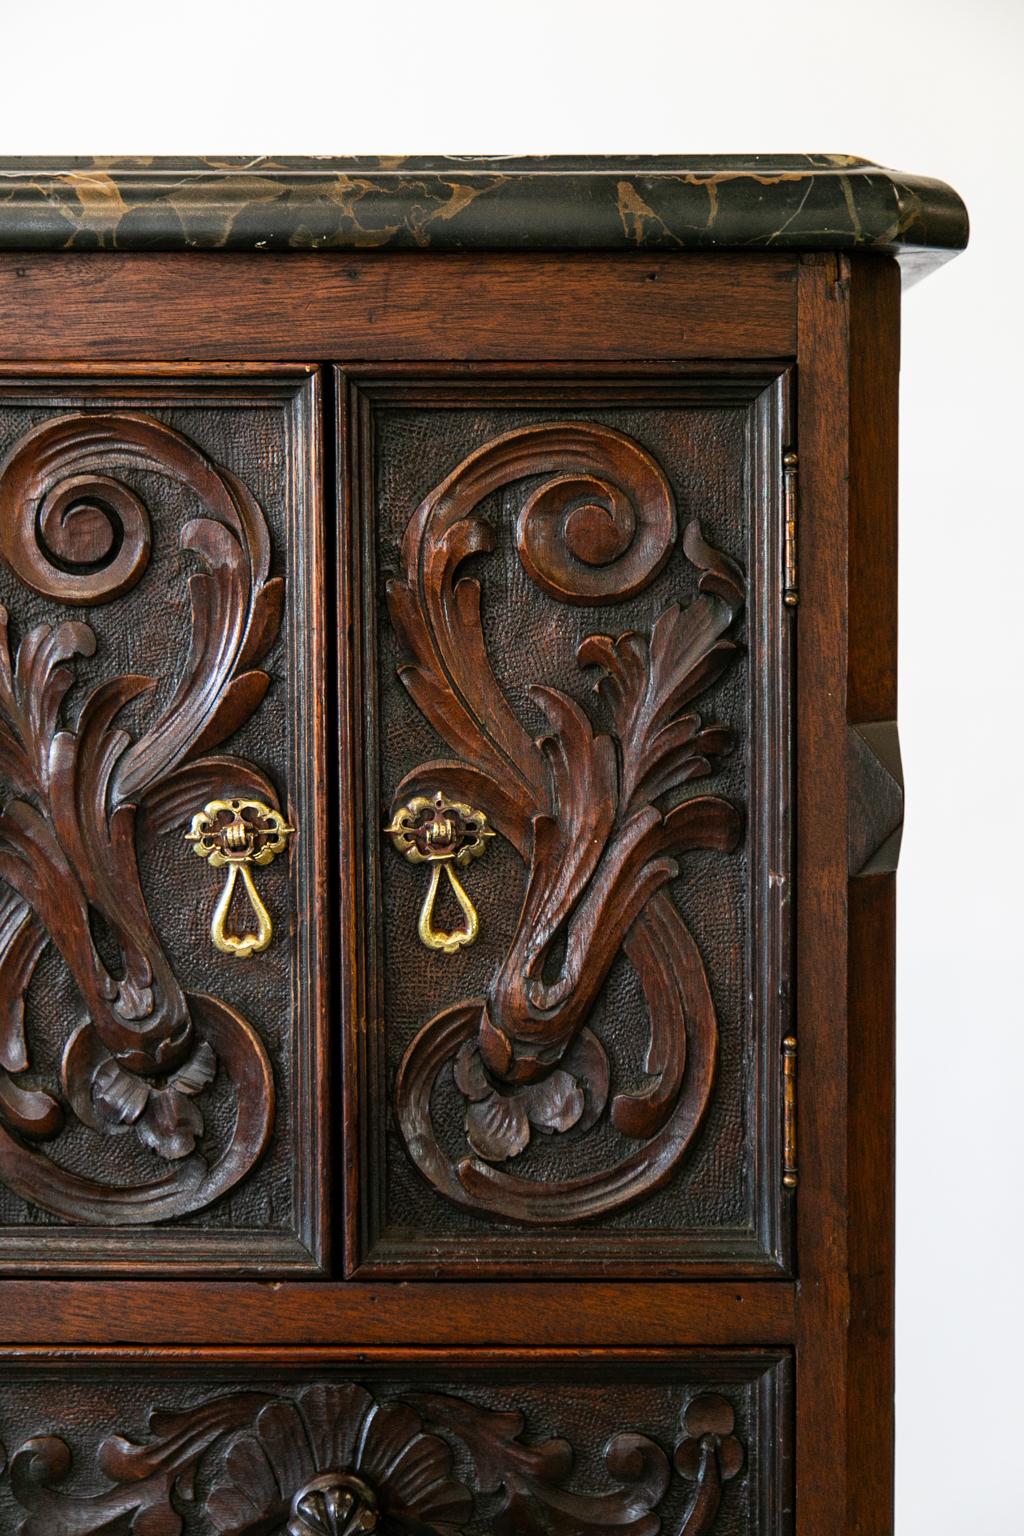 Walnut lingerie cabinet has a black and gold marble top. The drawer front and doors have carved floral arabesques, and the drawers have the original mushroom carved knobs. The base terminates in four carved cabriole legs.